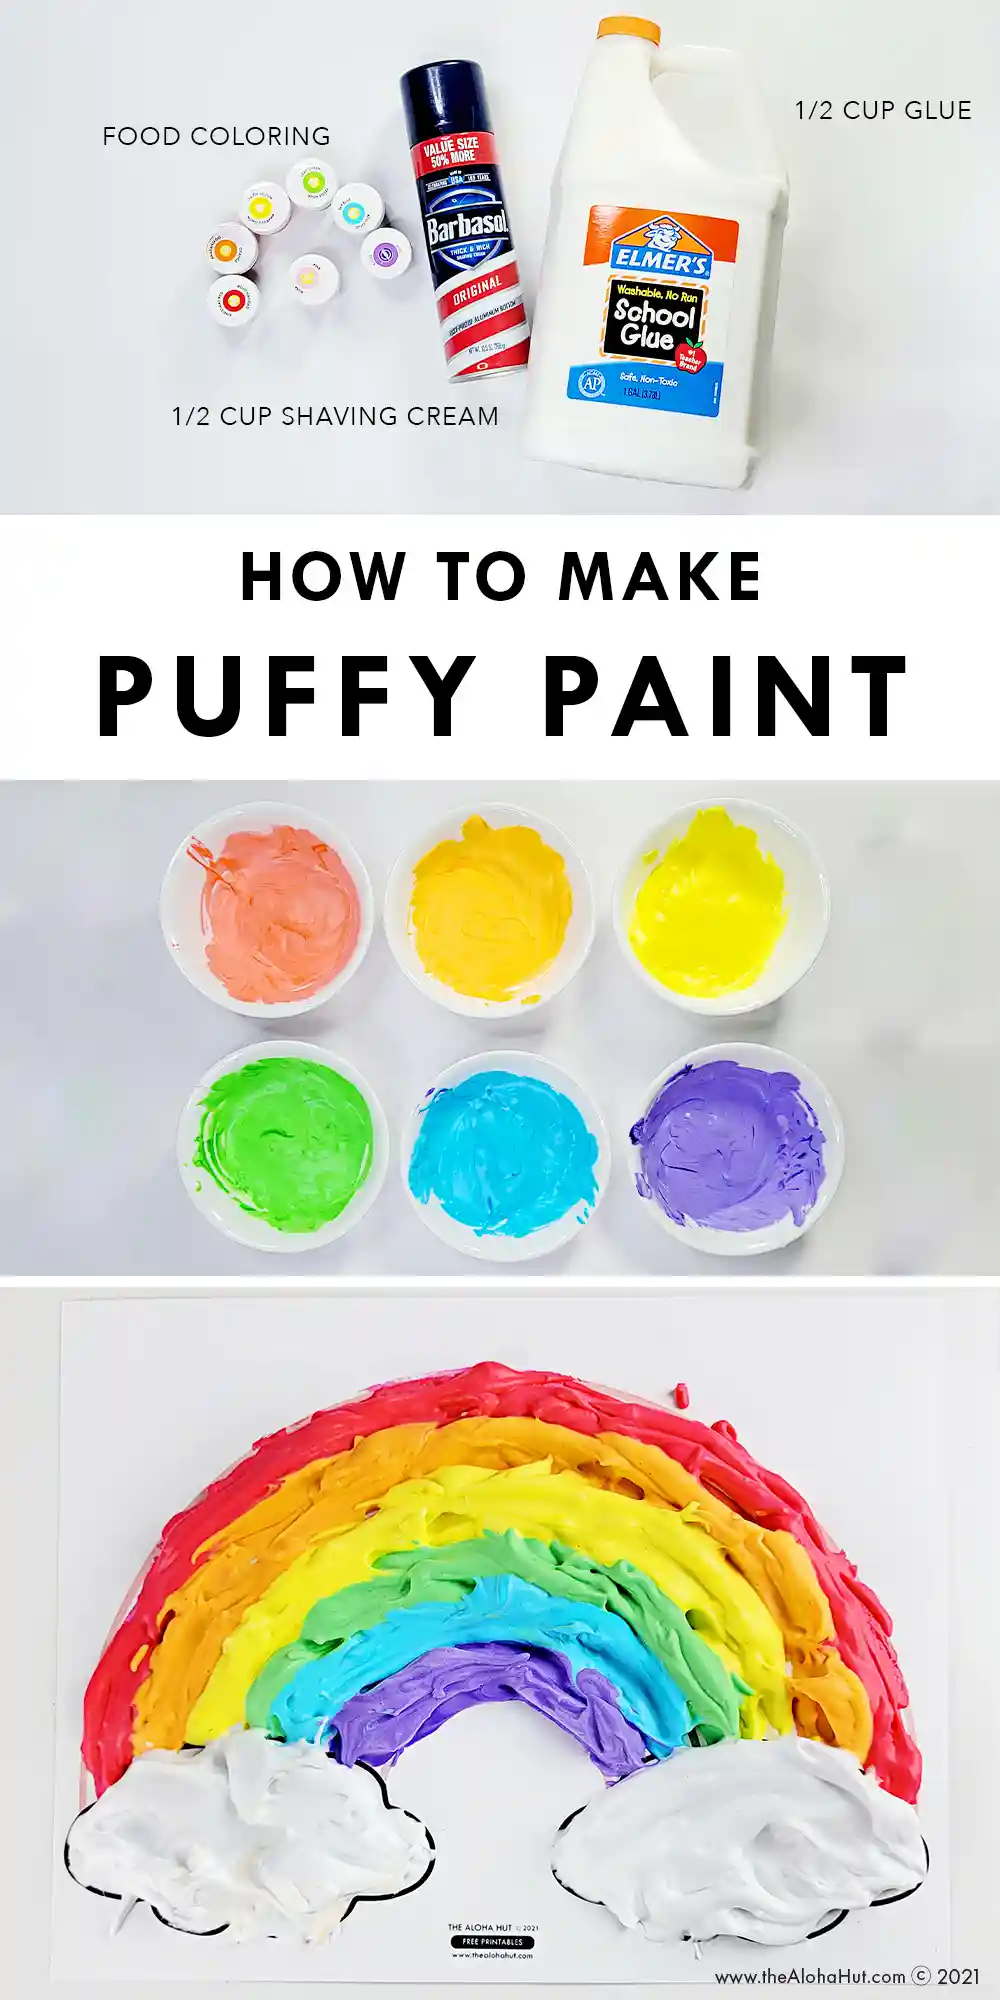 How to Make Puffy Paint?